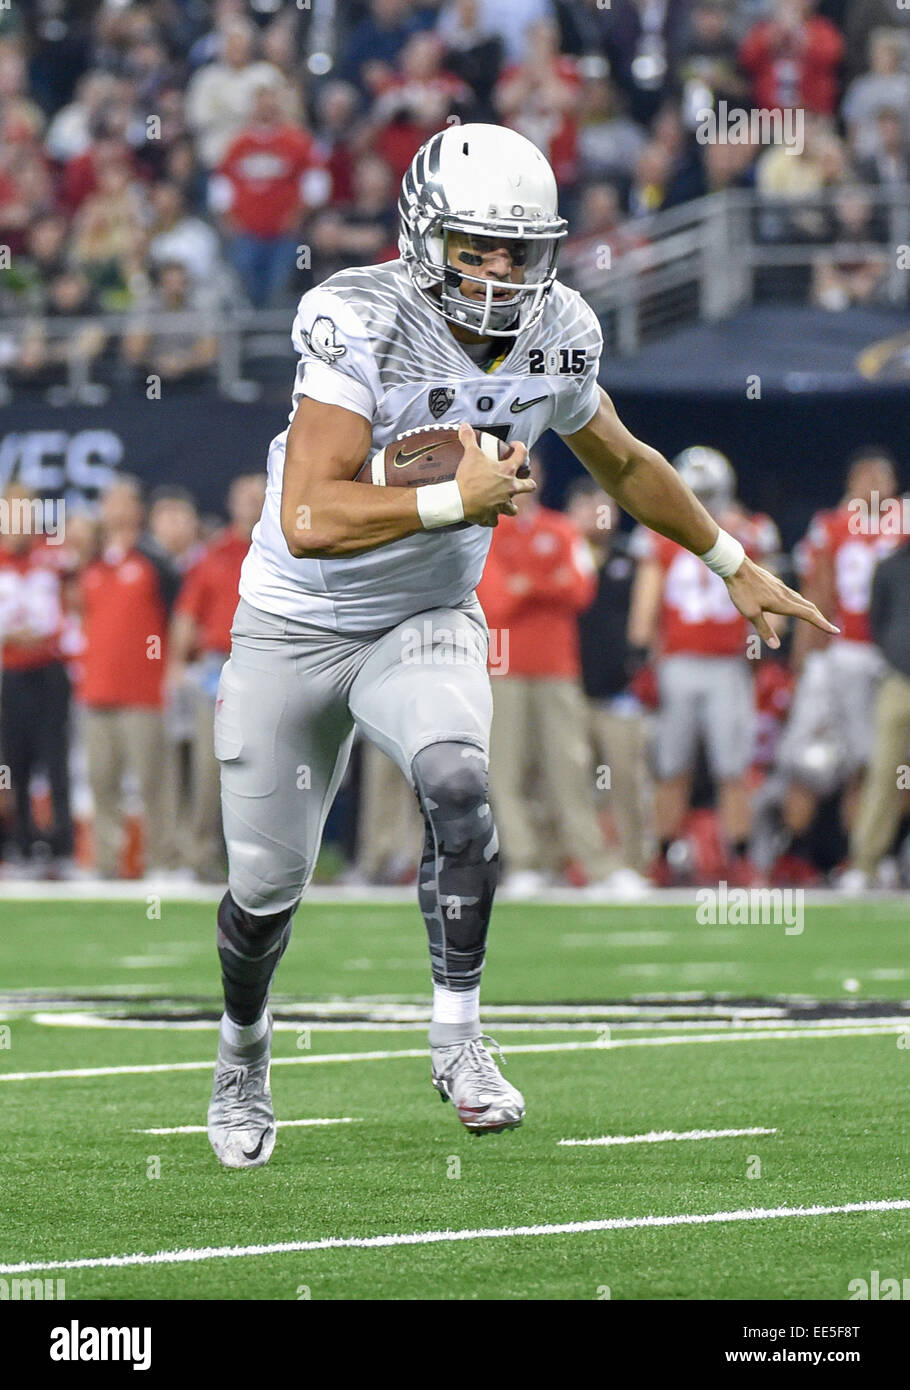 Oregon Ducks quarterback Marcus Mariota (8) carries the ball as he tries to get outside inside the 10-yard line.during the College Football Playoff National Championship game between Ohio State Buckeyes and Oregon Ducks January 12th 2015, at AT&T in Arlington, Texas.Ohio State wins 42-20. Stock Photo